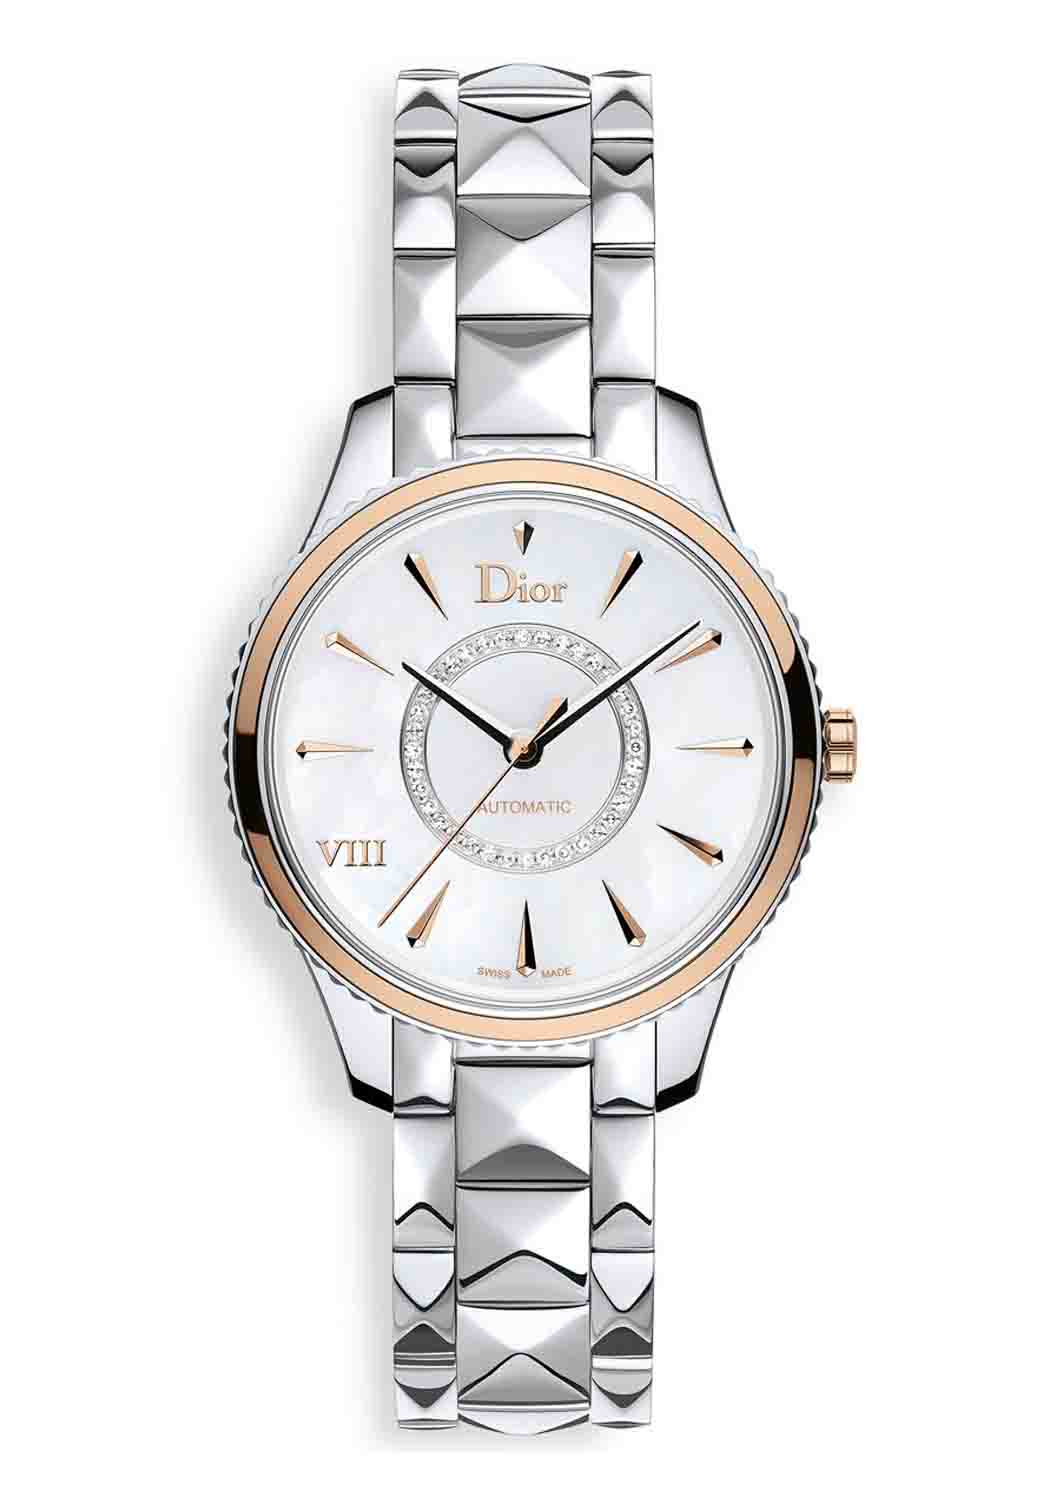 Dior VIII Montaigne White Mother of Pearl 36mm